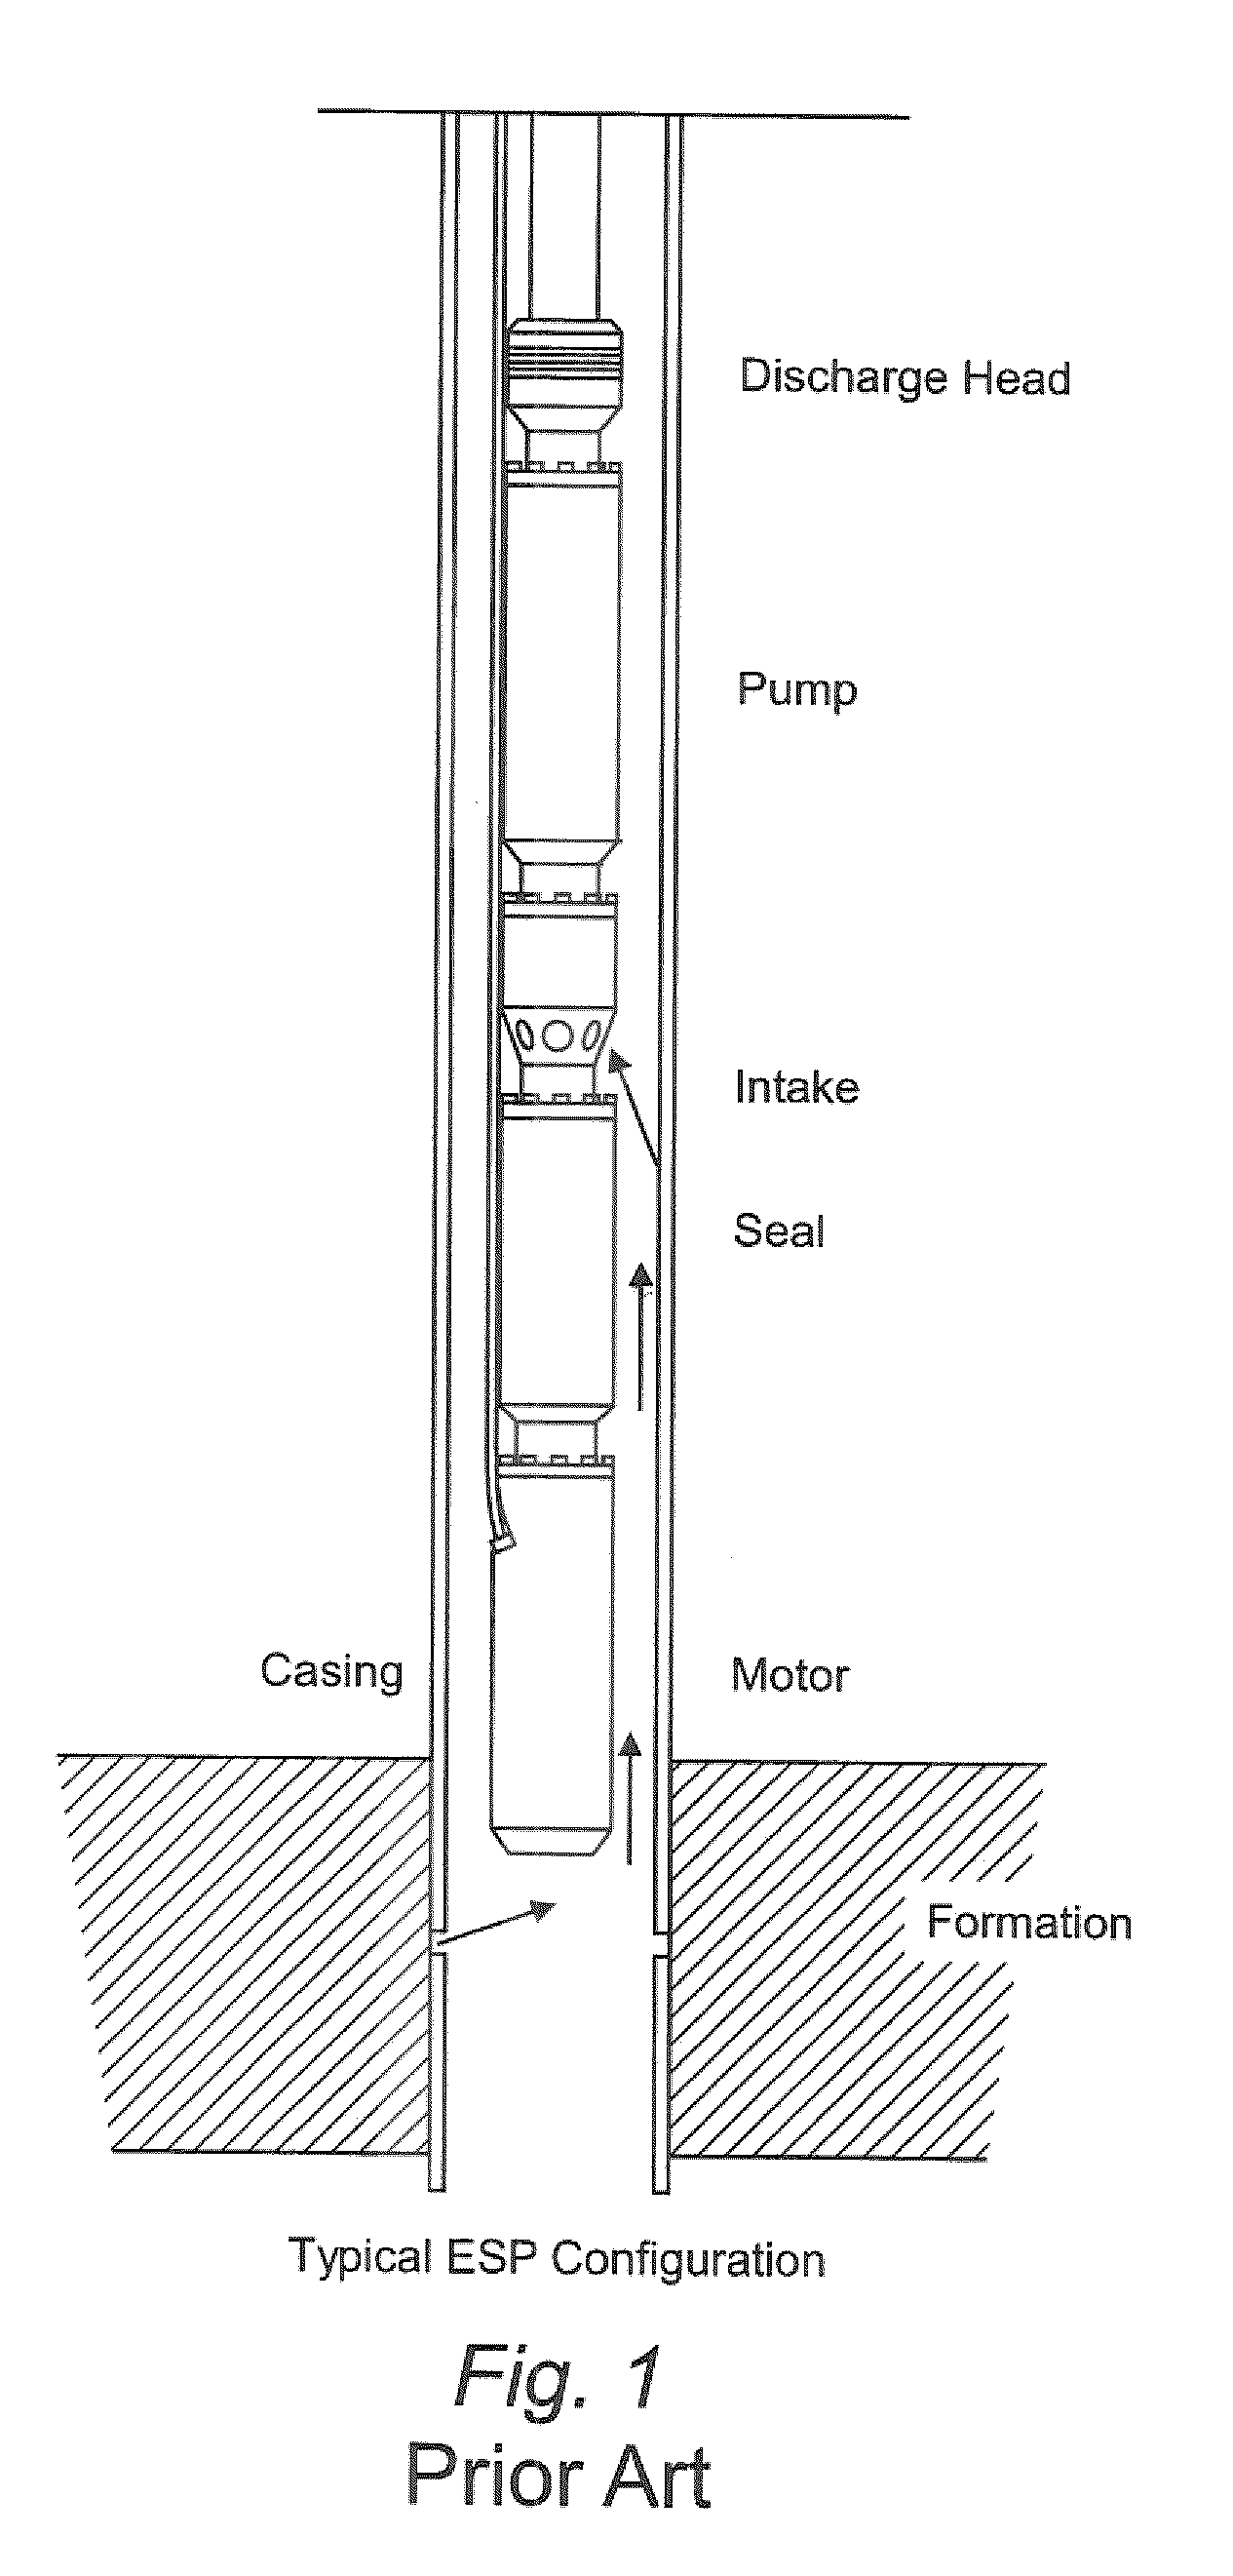 Switch mechanisms that allow a single power cable to supply electrical power to two or more downhole electrical motors alternatively and methods associated therewith